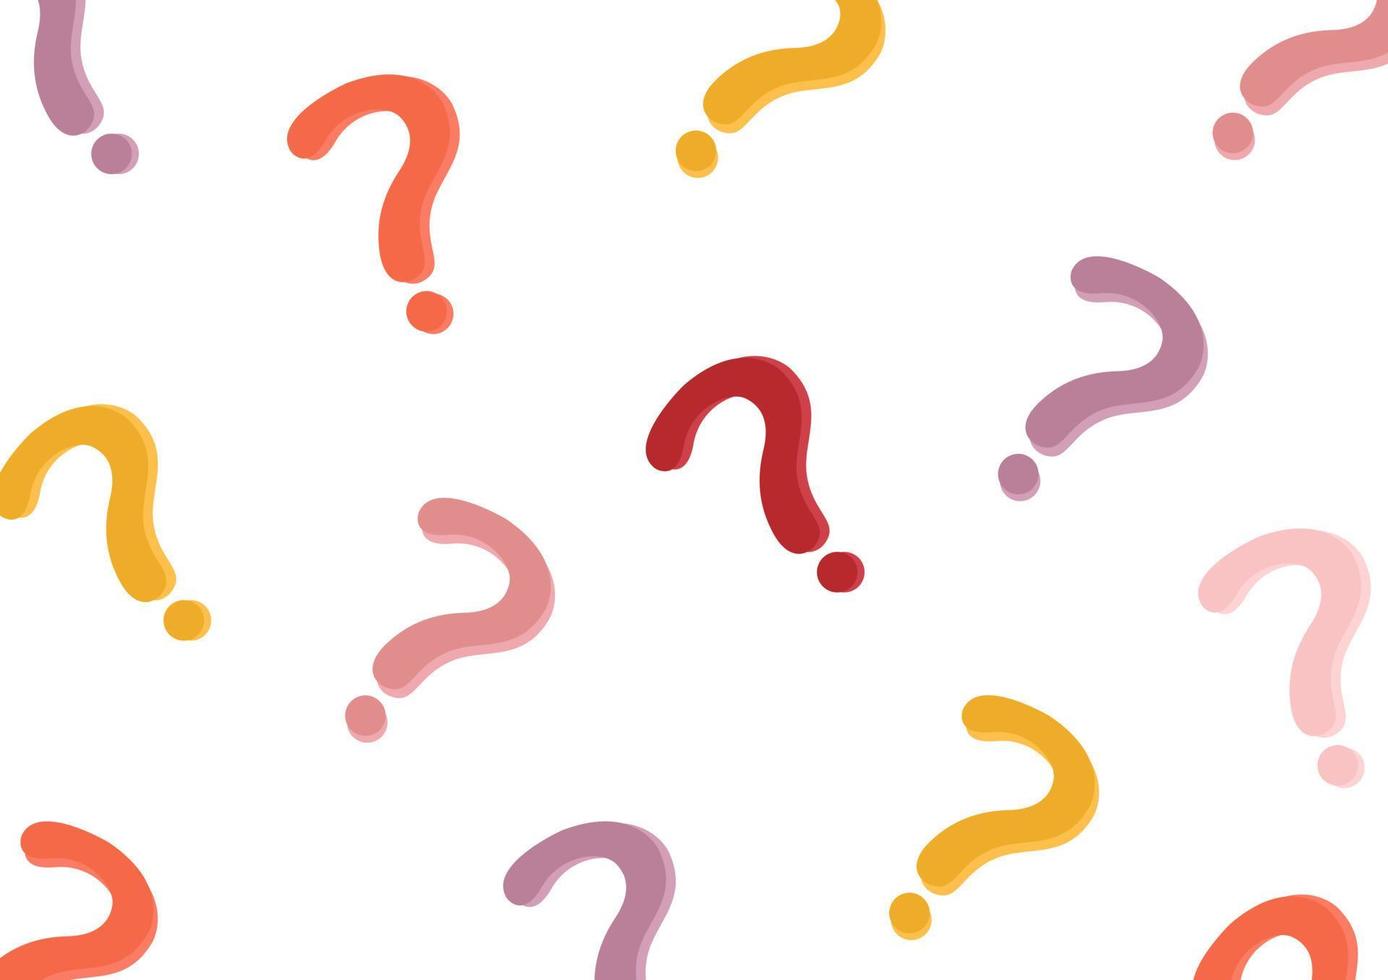 abstract pattern with a colorful question mark design vector